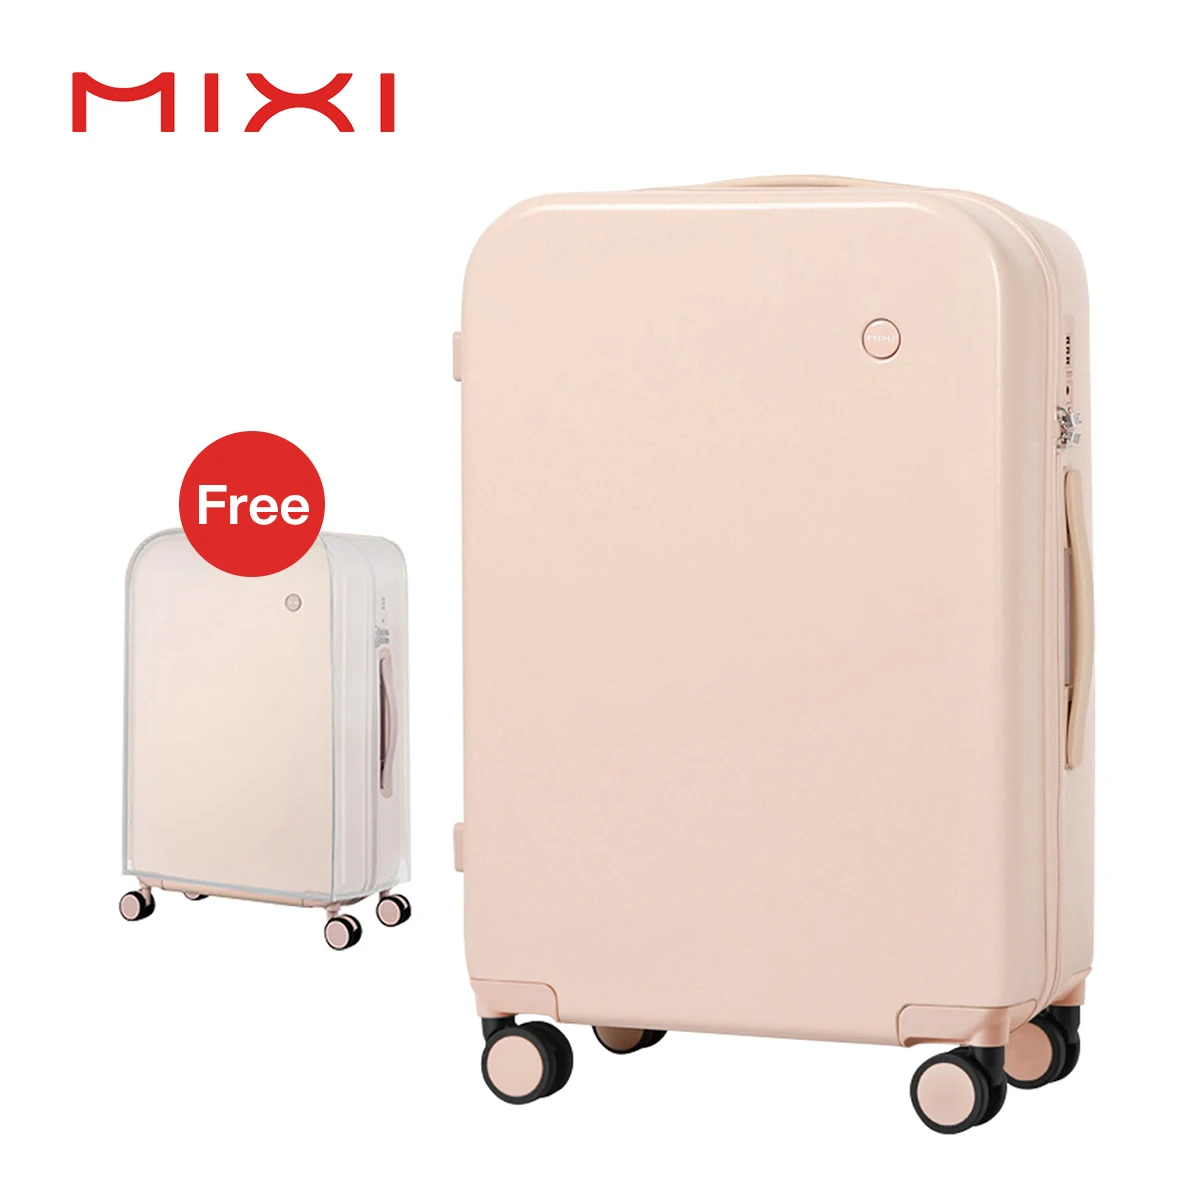 18-inch Carry-on Luggage With Telescopic Handle For Women, Stylish And  Portable, Lightweight And Silent Wheels For Travel Suitcase Hardside Wheels  Rolling Small Baggage Trolley Case Mini Travel Storage Bag Case For Airplane